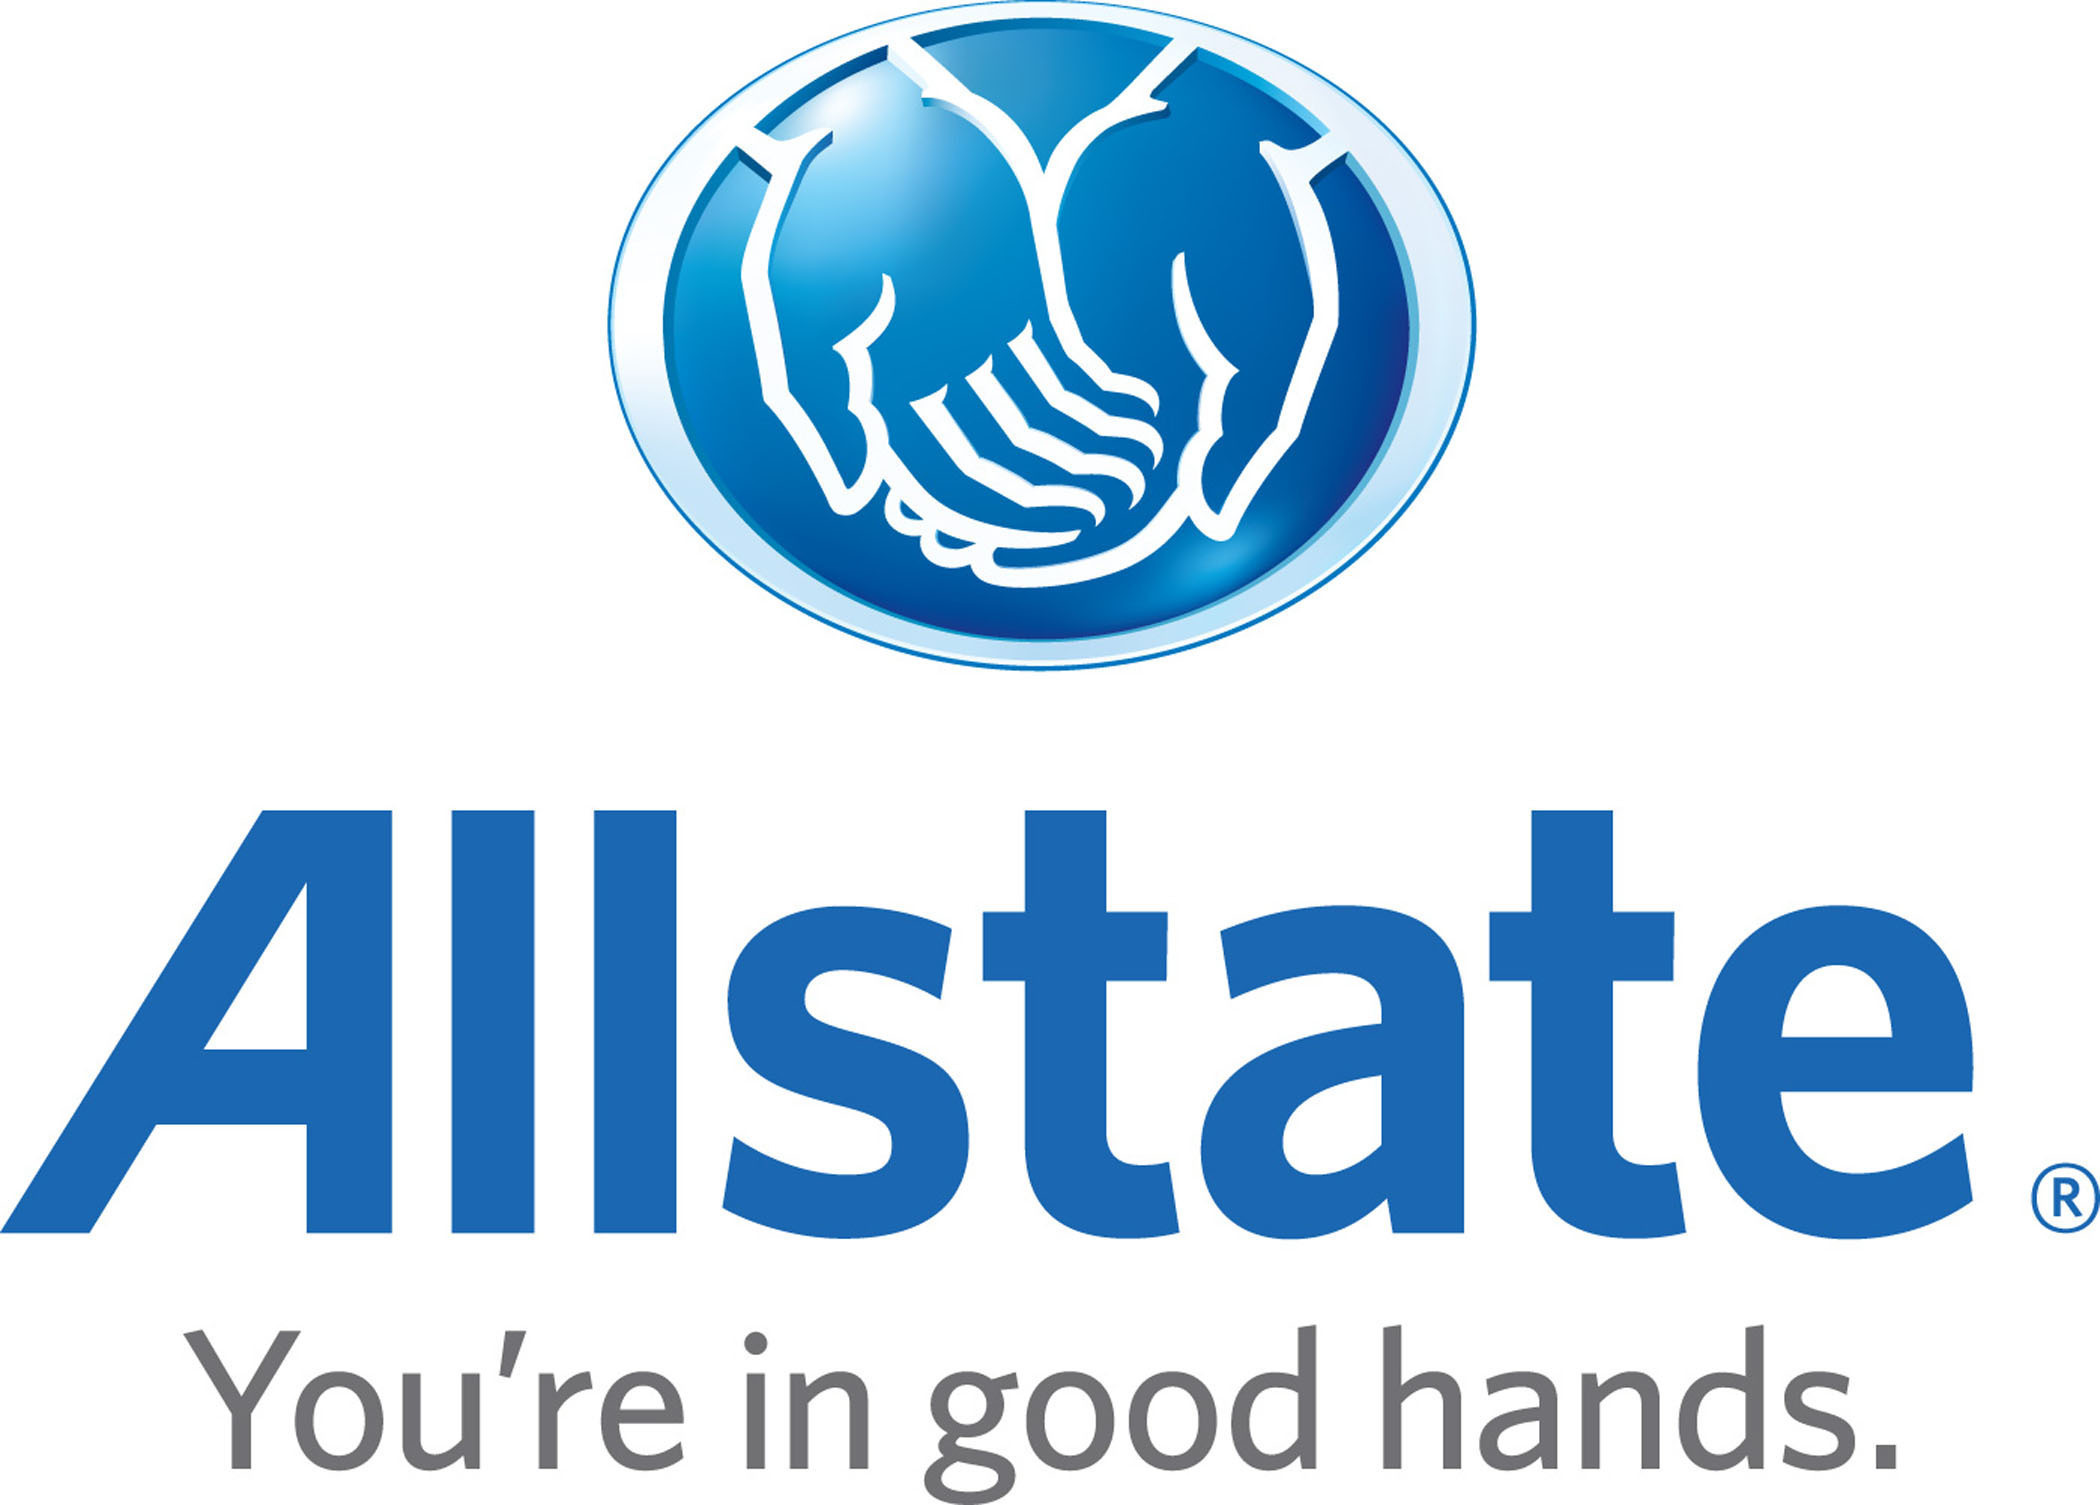 Allstate (ALL) Are You in Good Hands With Their Stock?